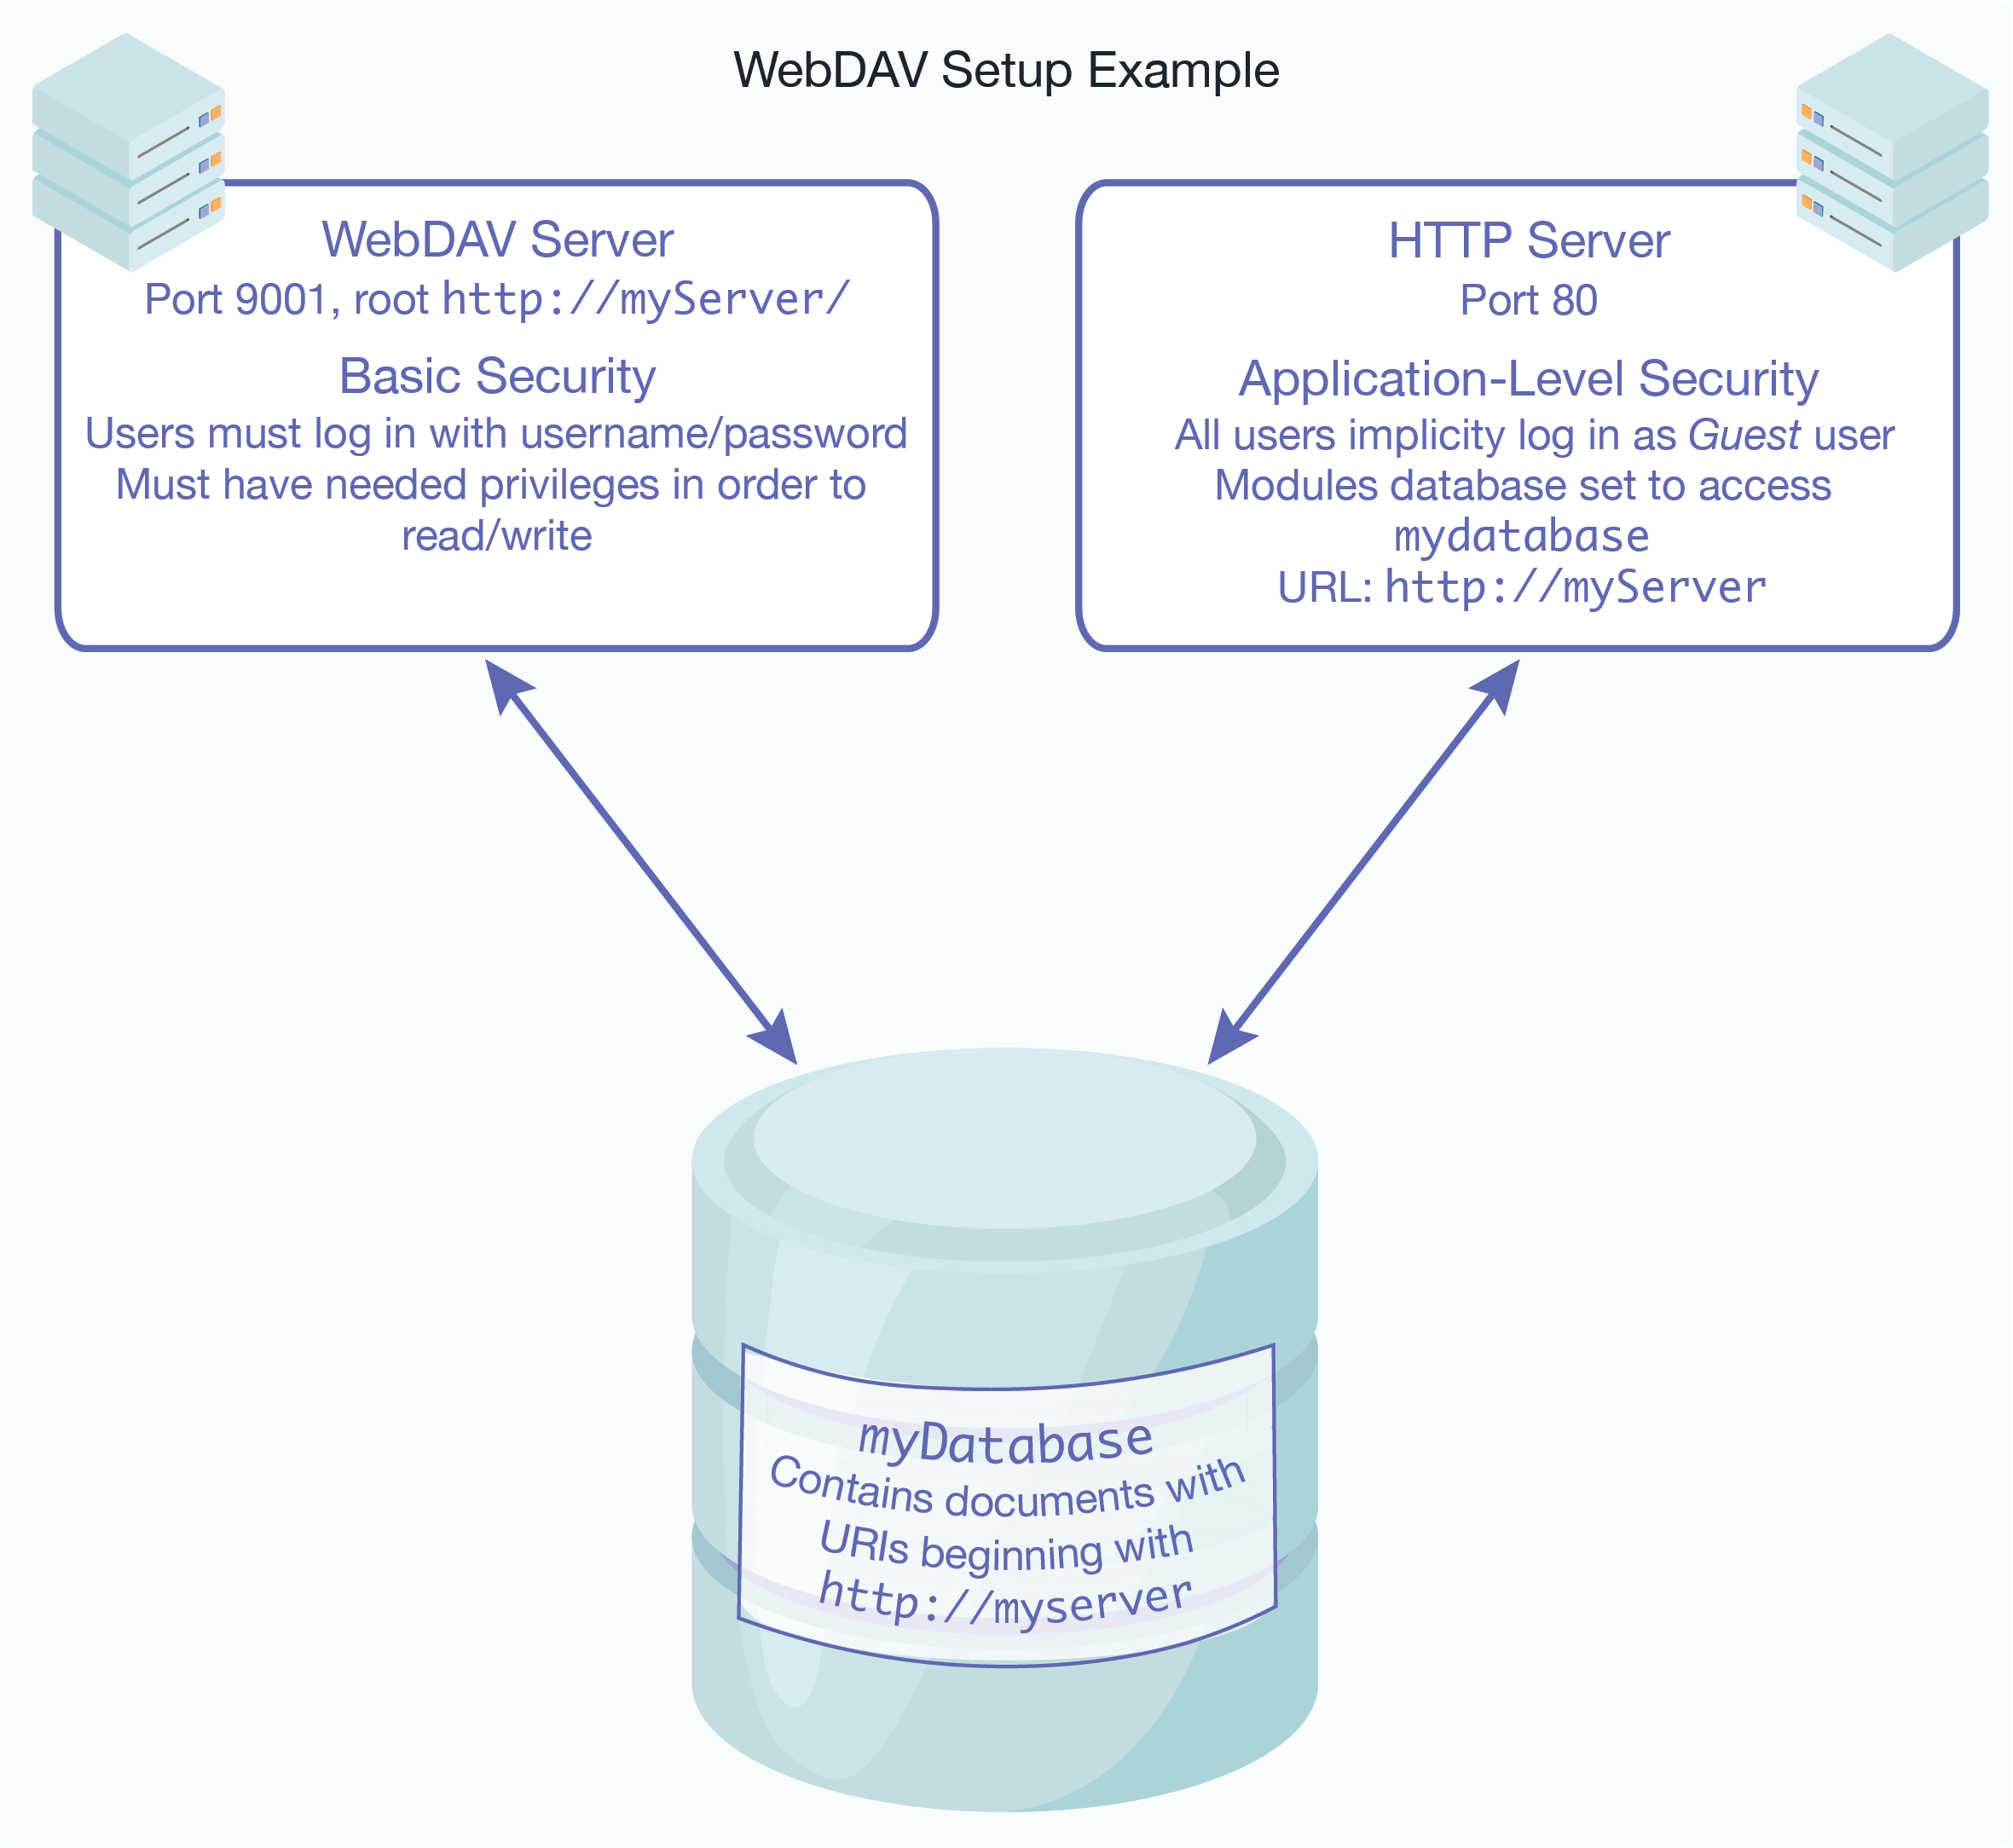 Graphic showing an example of WebDAV Setup.